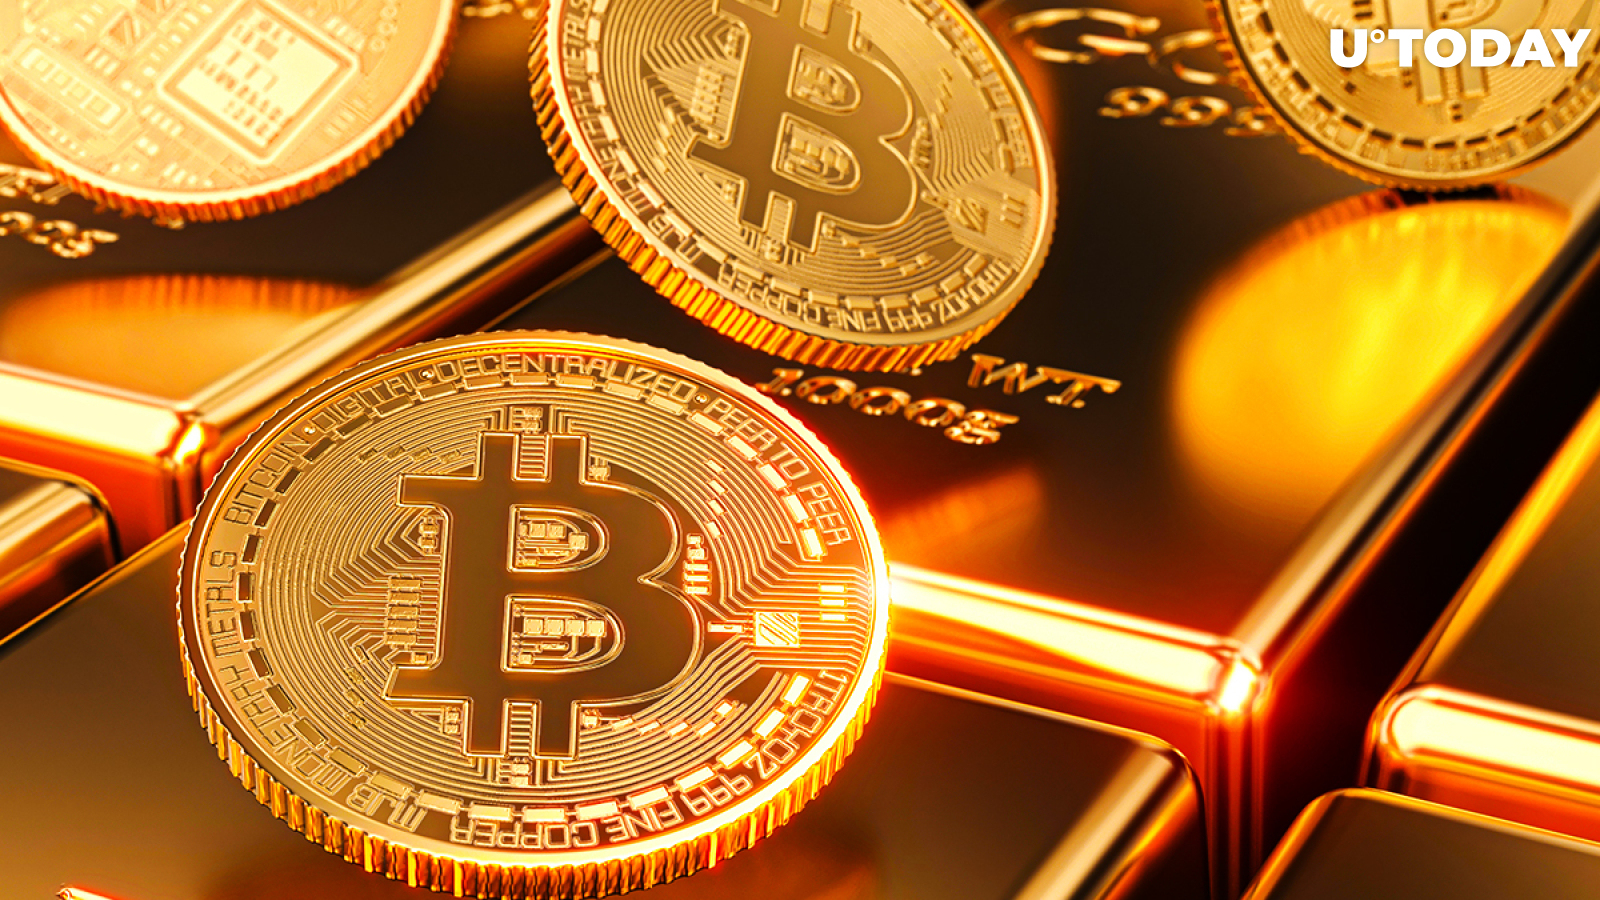 Coincidence? Bitcoin Struggles as Gold Has its Worst Week Since March Crash